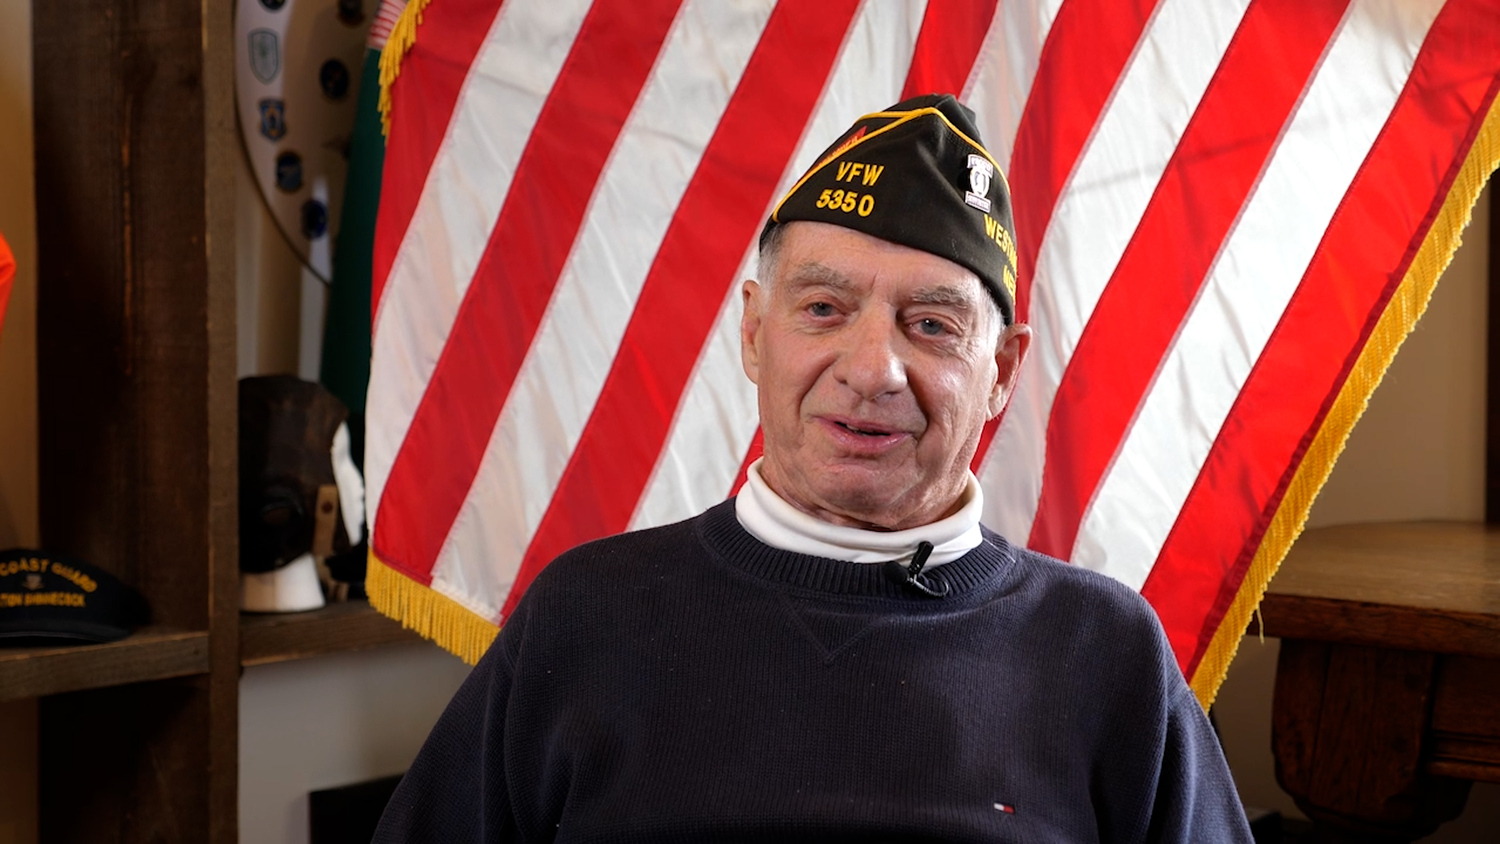 Joseph “Kip” Kirby during his USA Warrior Stories interview in 2021 at Westhampton Beach VFW Post 5350. COURTESY USA WARRIOR STORIES